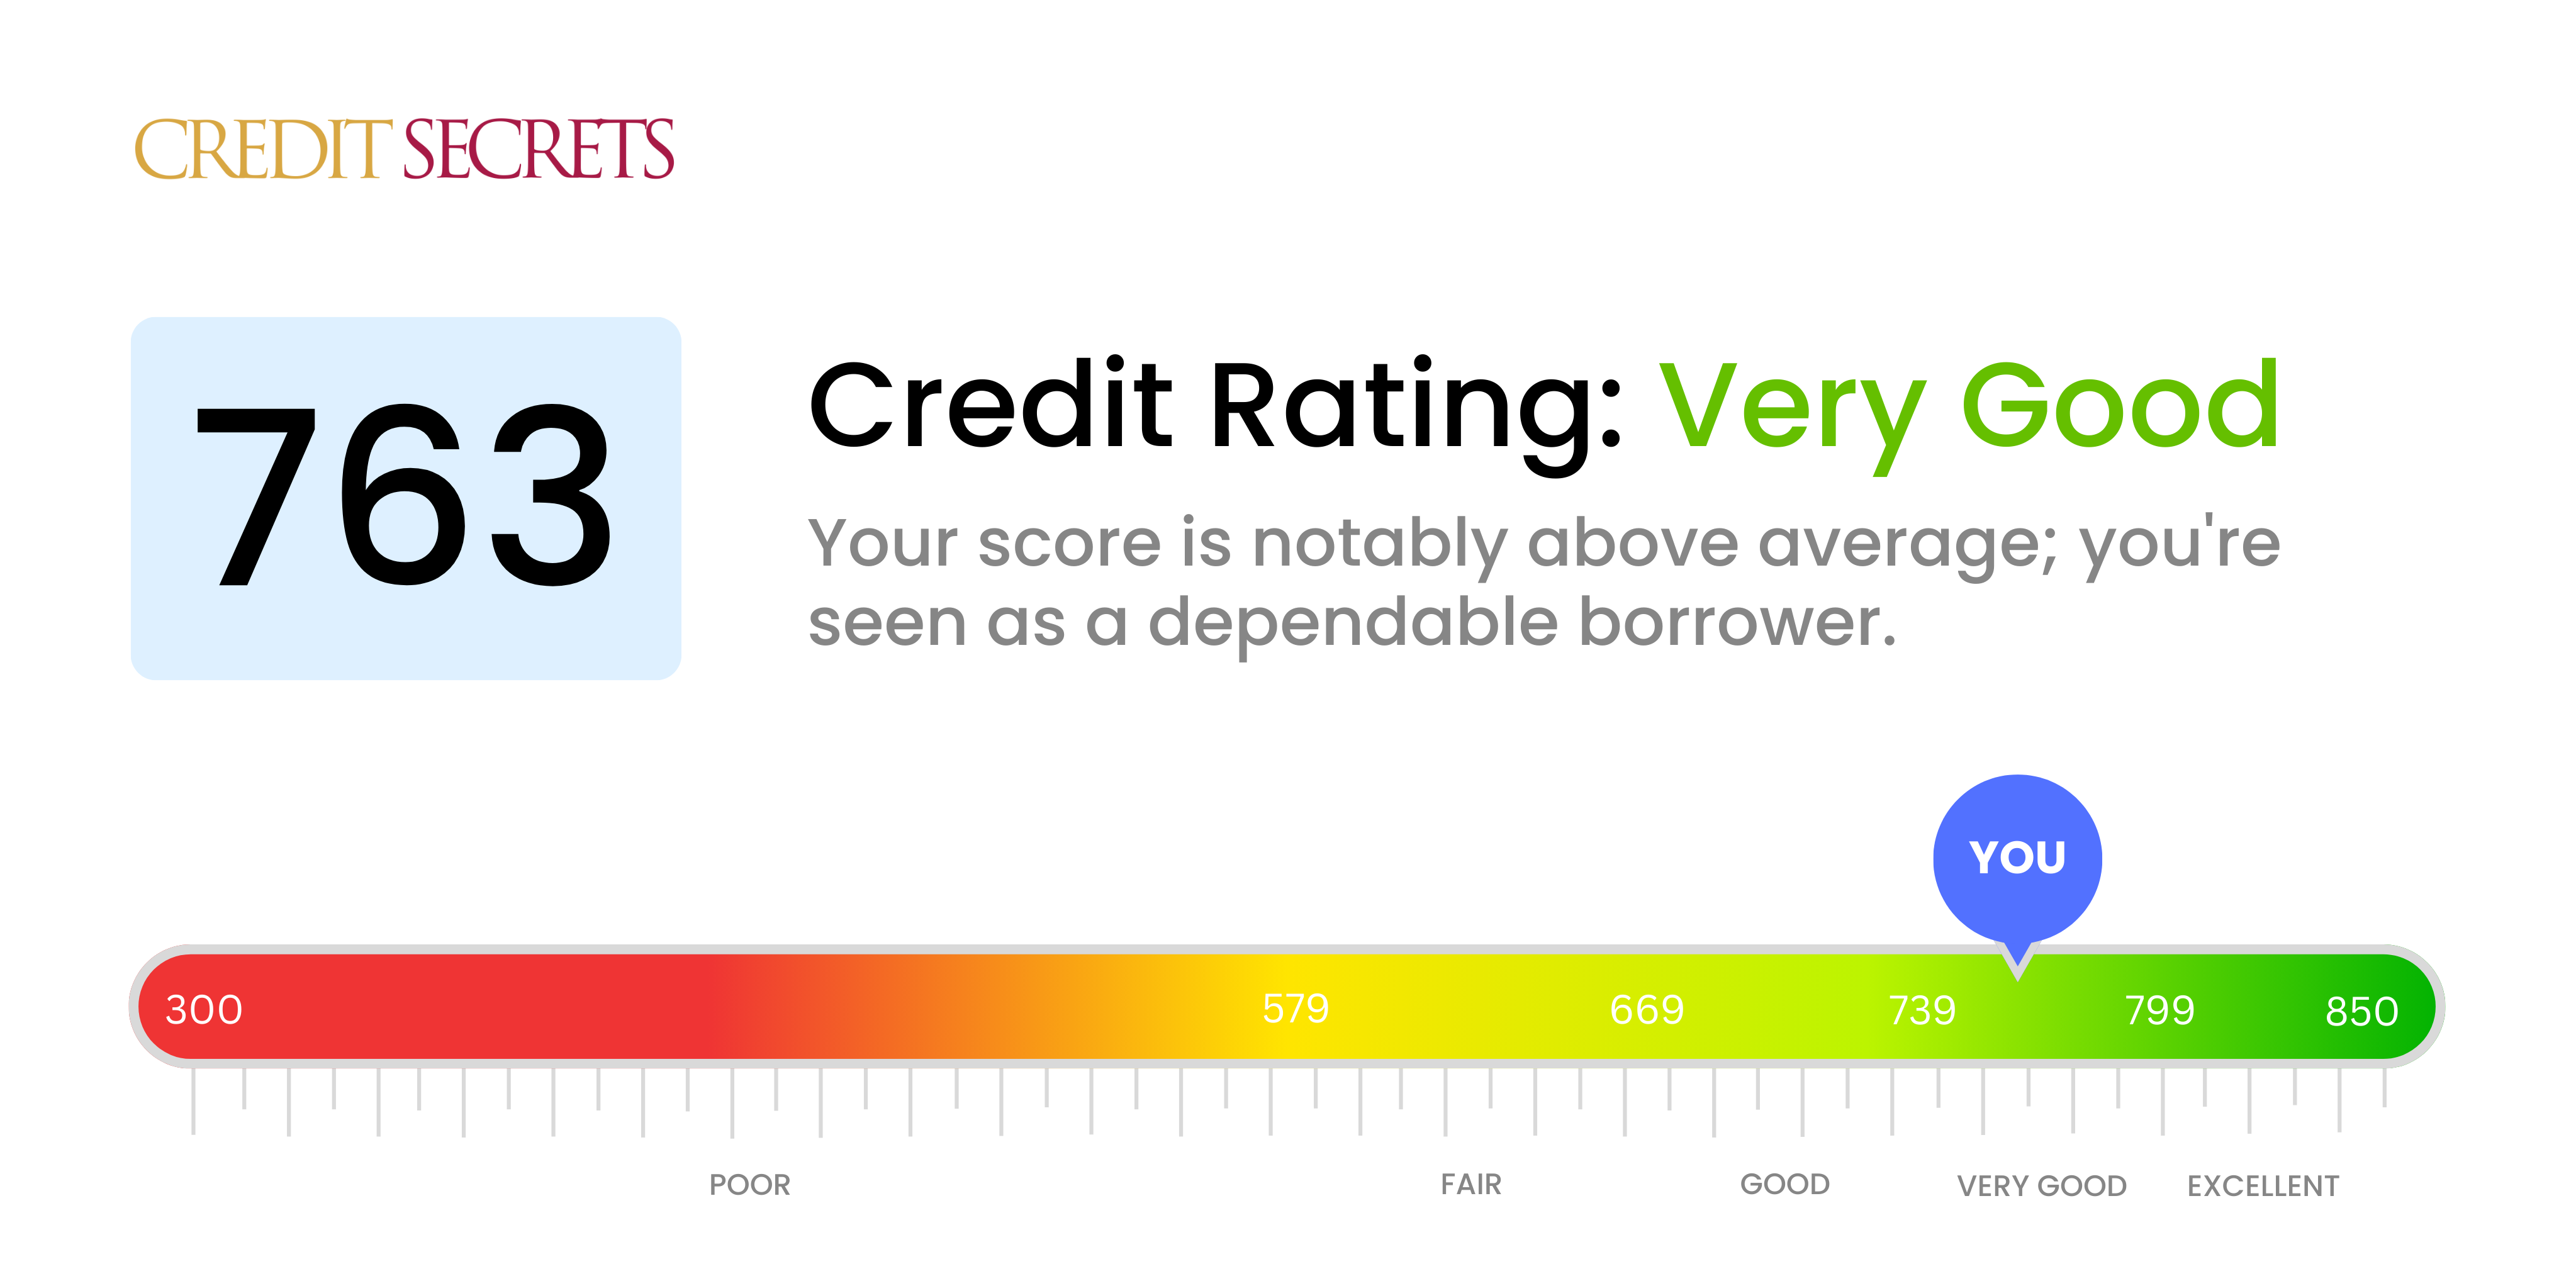 Is 763 a good credit score?